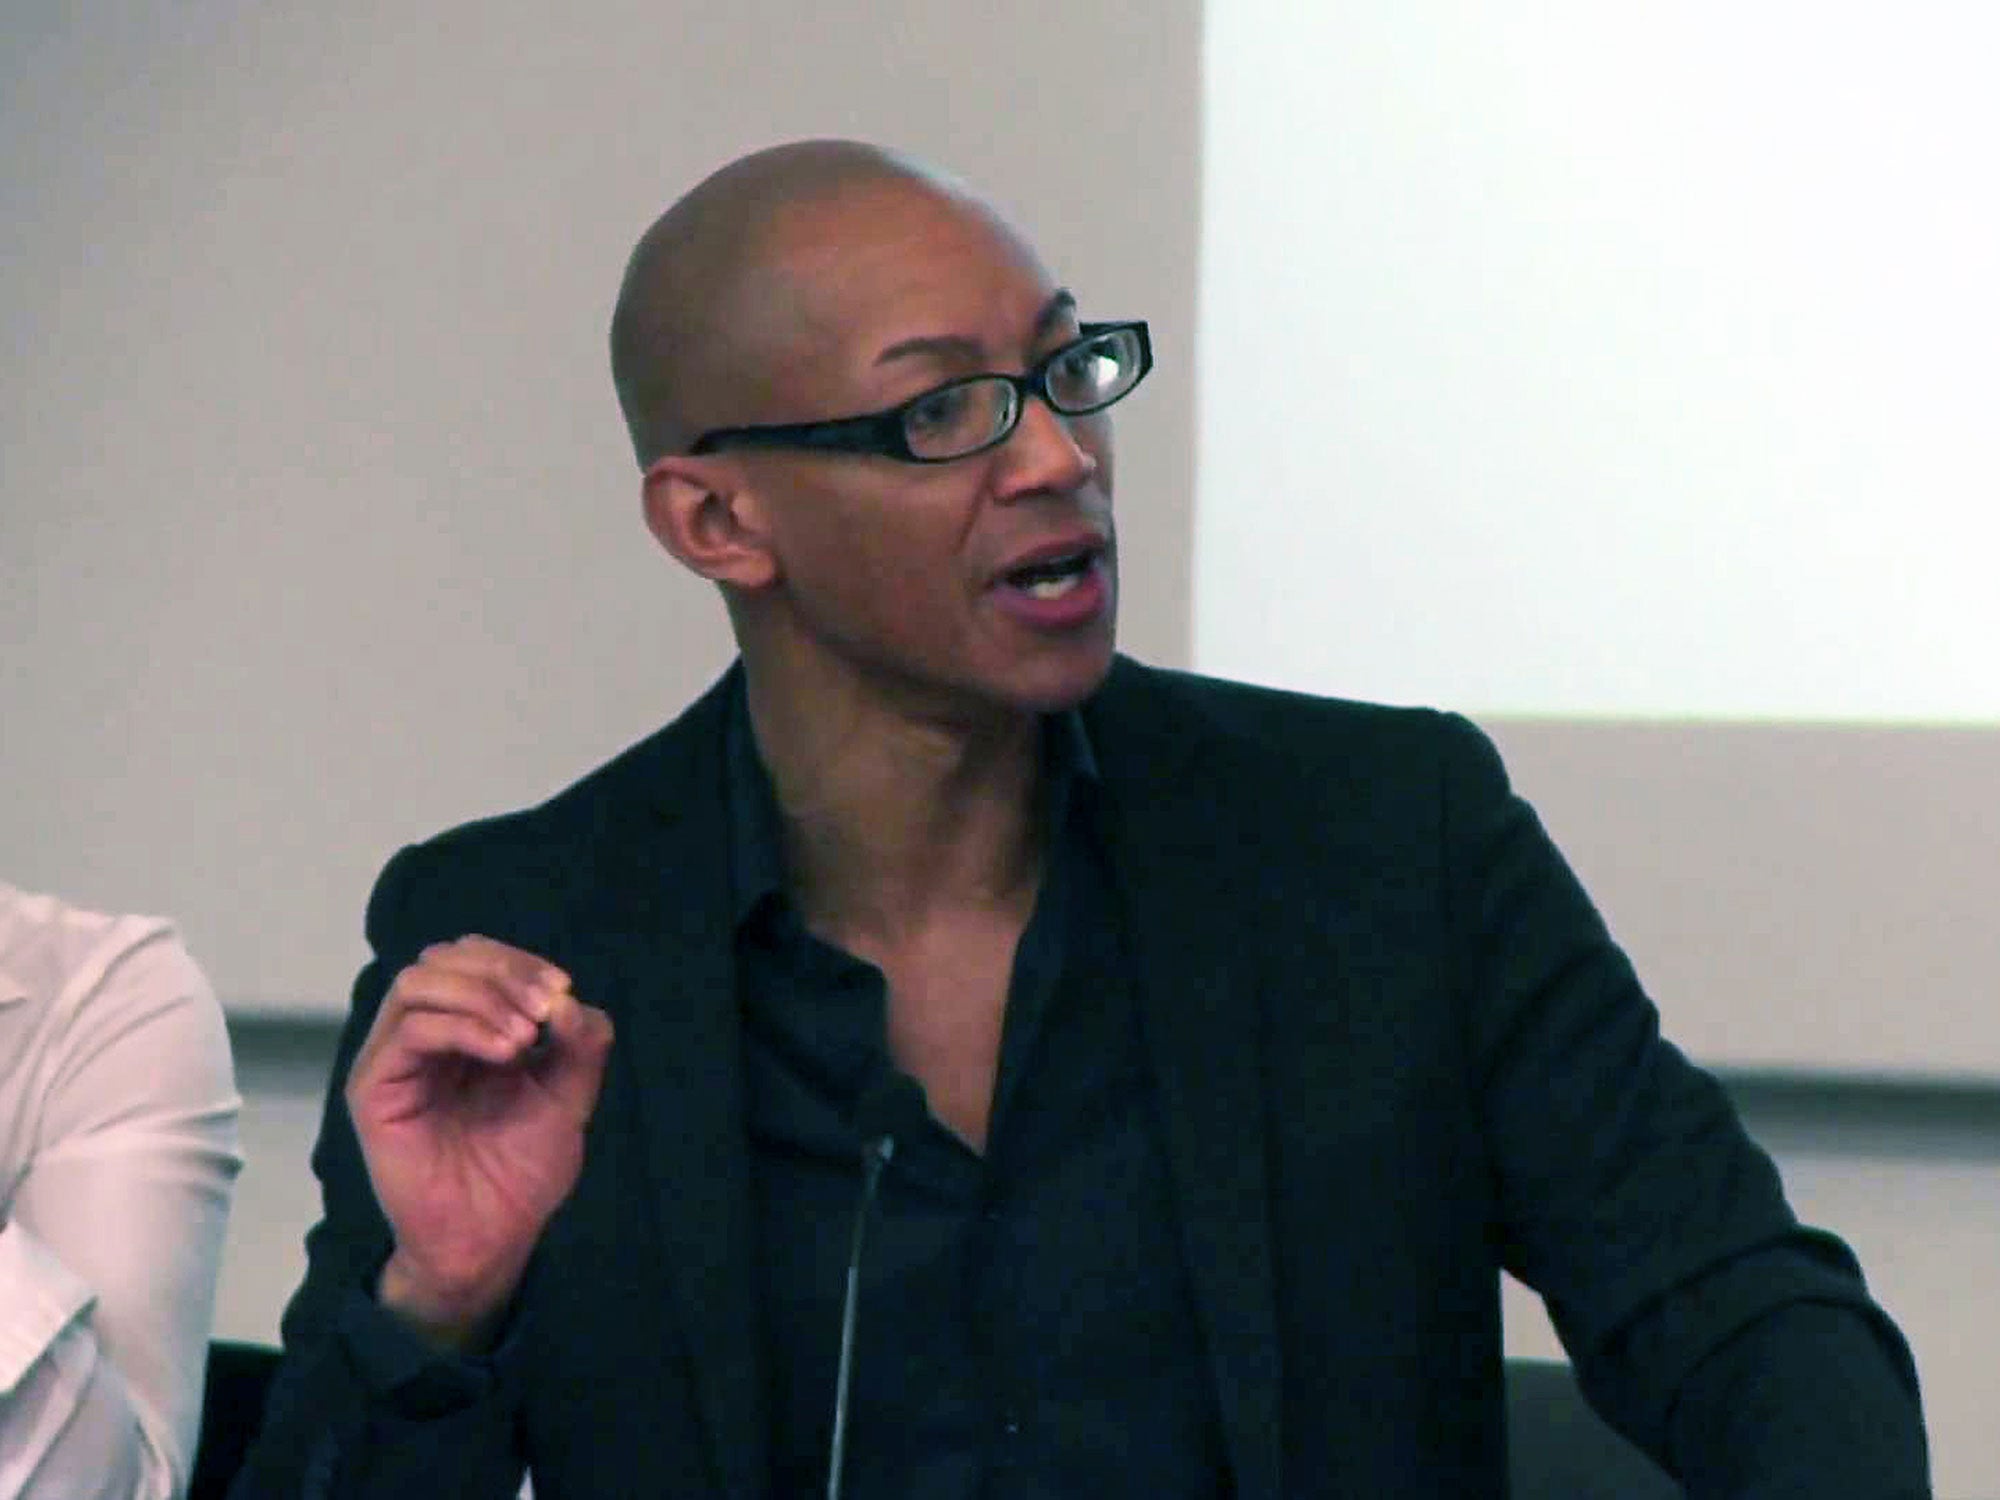 Dr Nathaniel Colman says plans for a new Black Studies MA were opposed by UCL